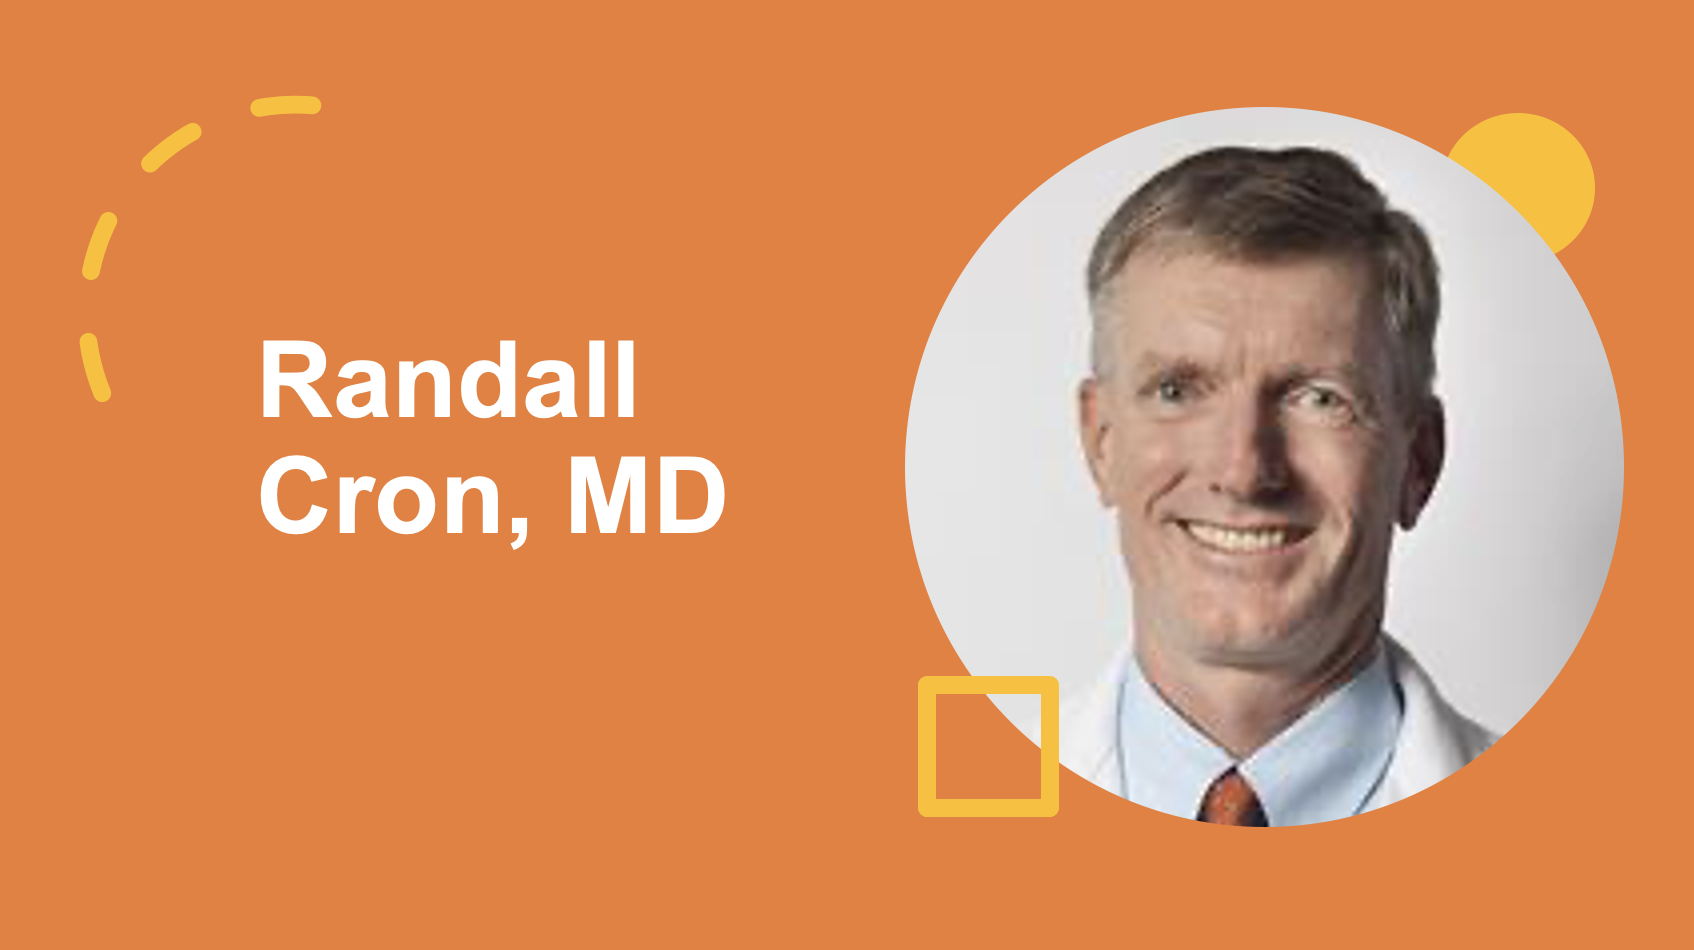 Randall Cron, MD, PhD: The Role of Rheumatologists in COVID-19